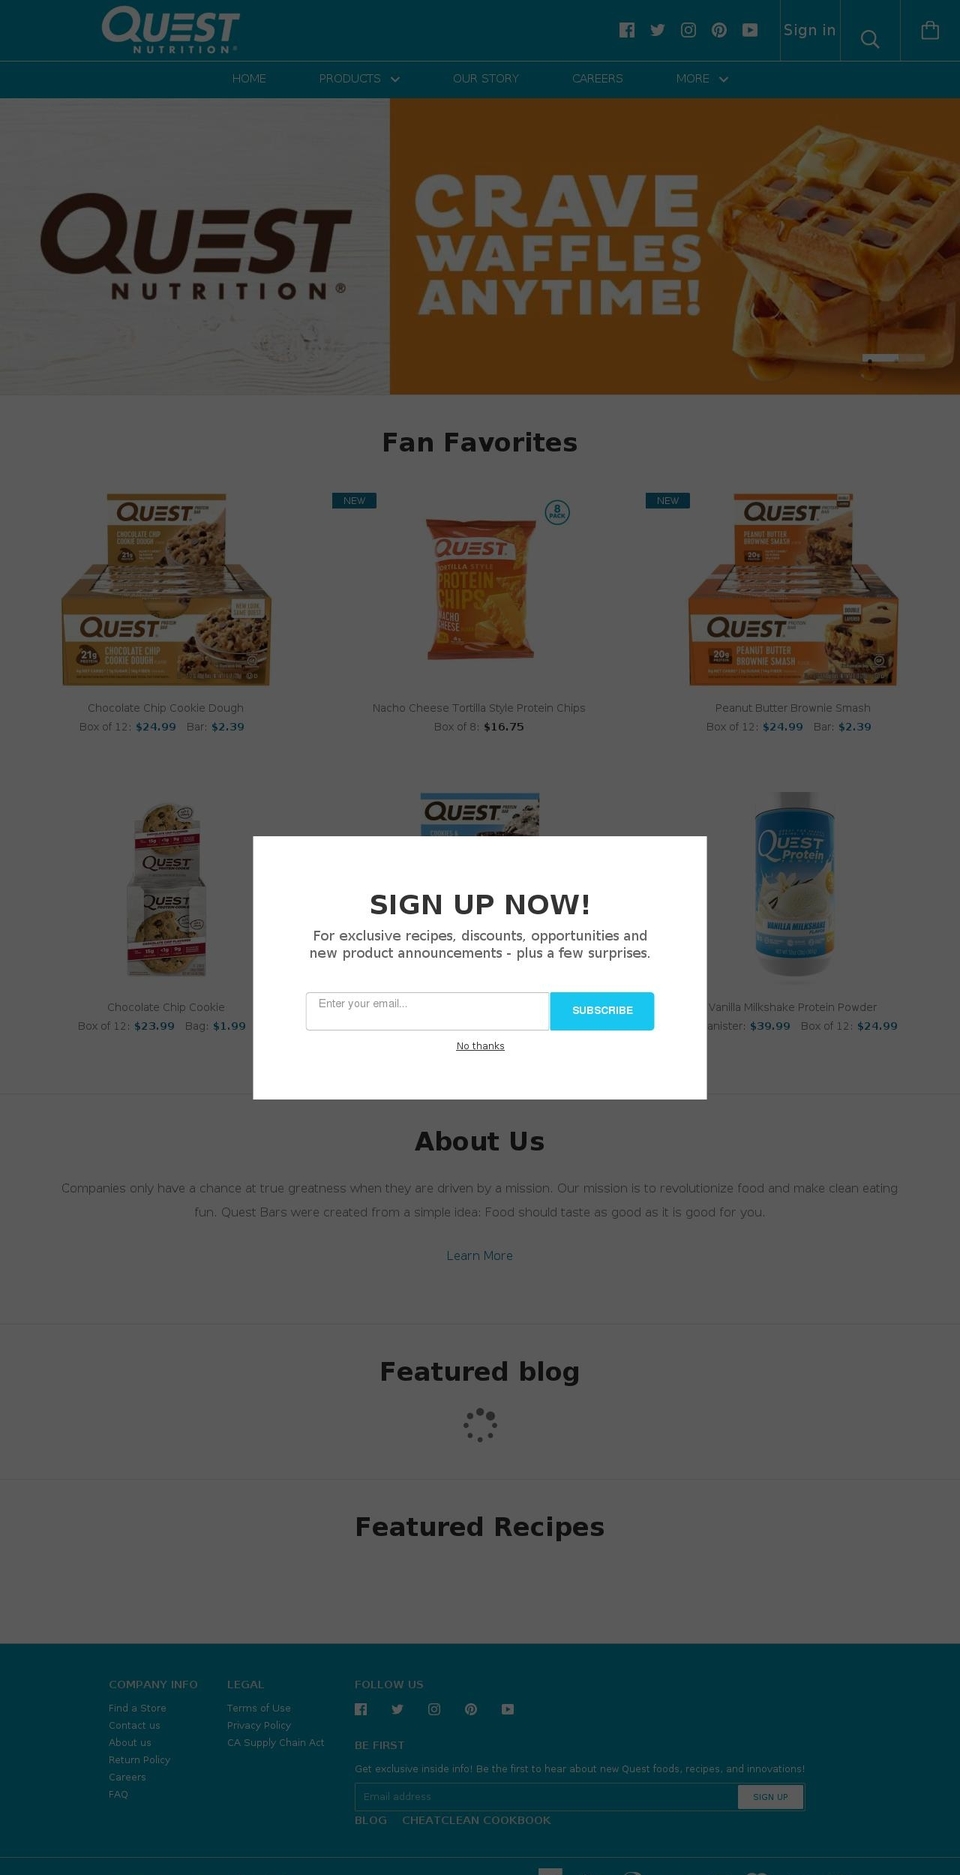 Copy of Kagami W\/Recharge recurring orders7\/31\/... Shopify theme site example questnutrion.com